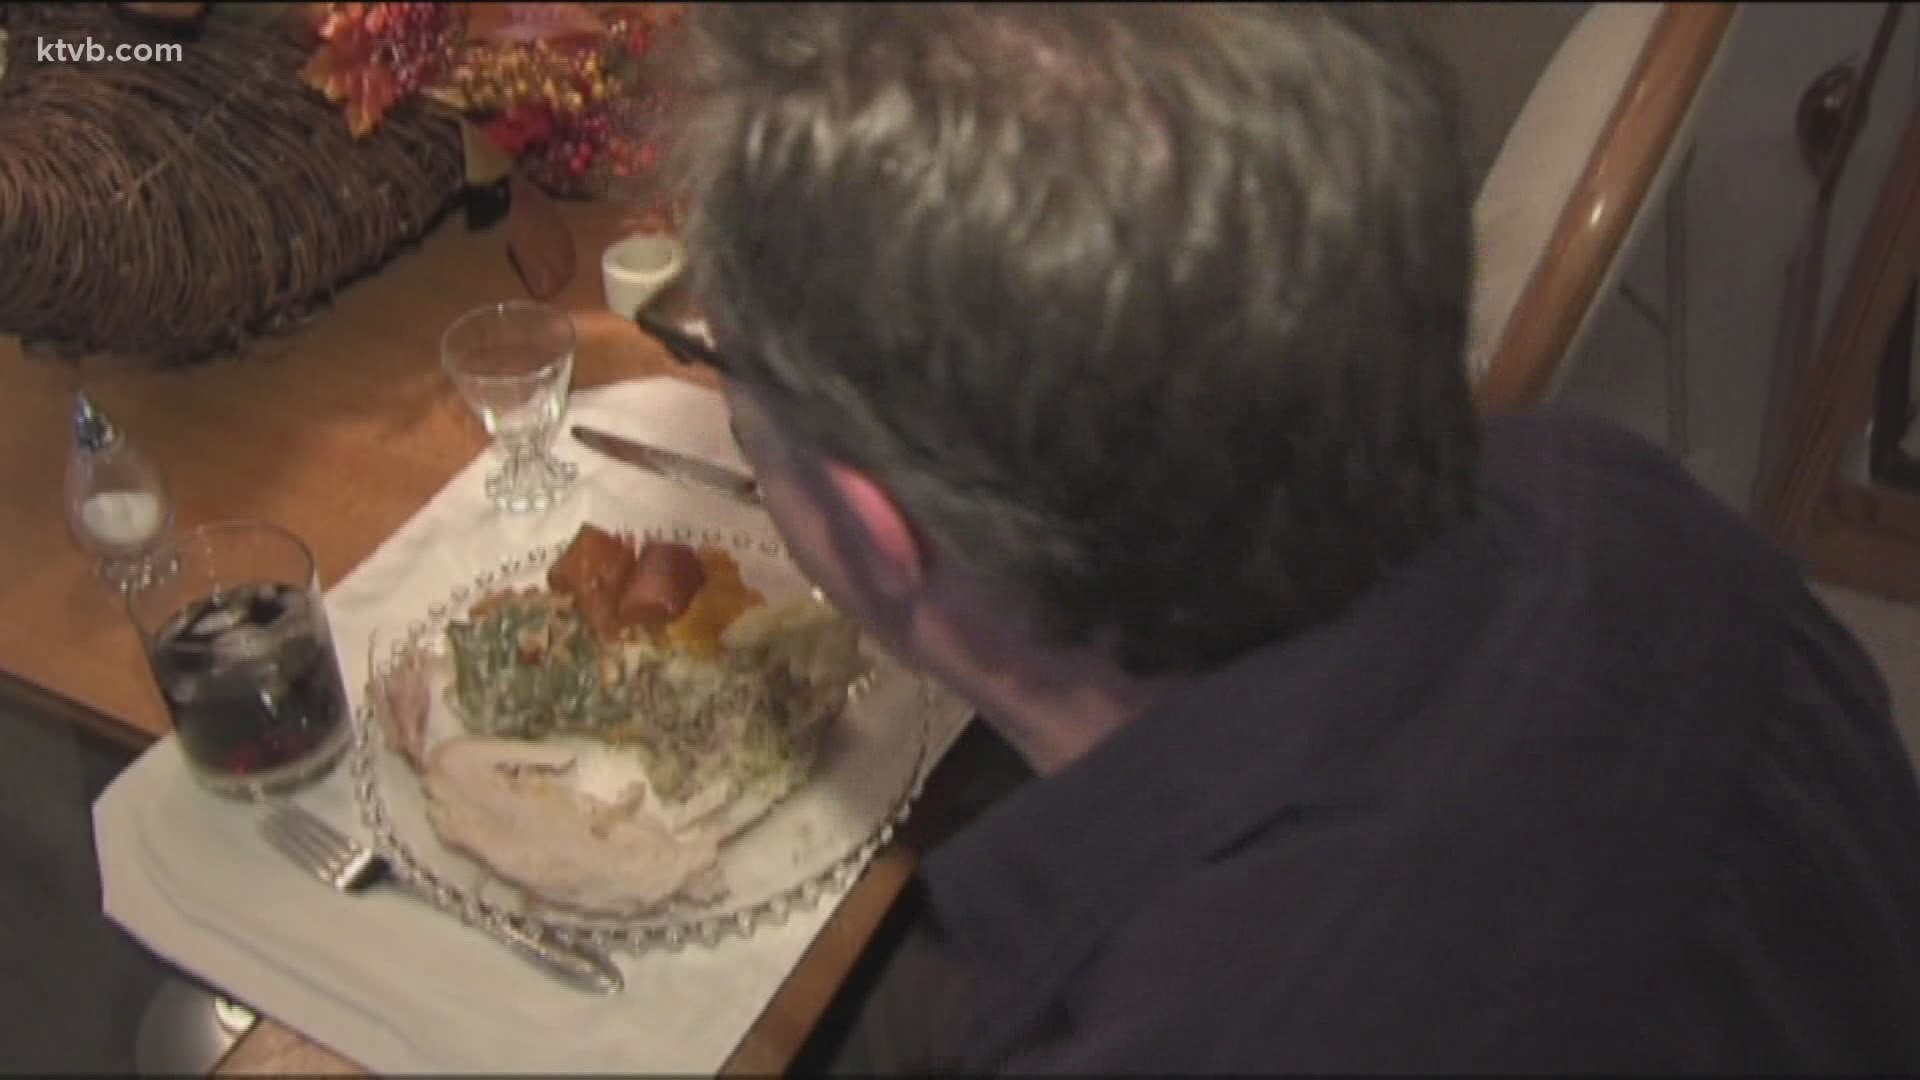 California's governor has issued guidelines for Thanksgiving gatherings. We talked with an expert who told us how you can keep your family safe.